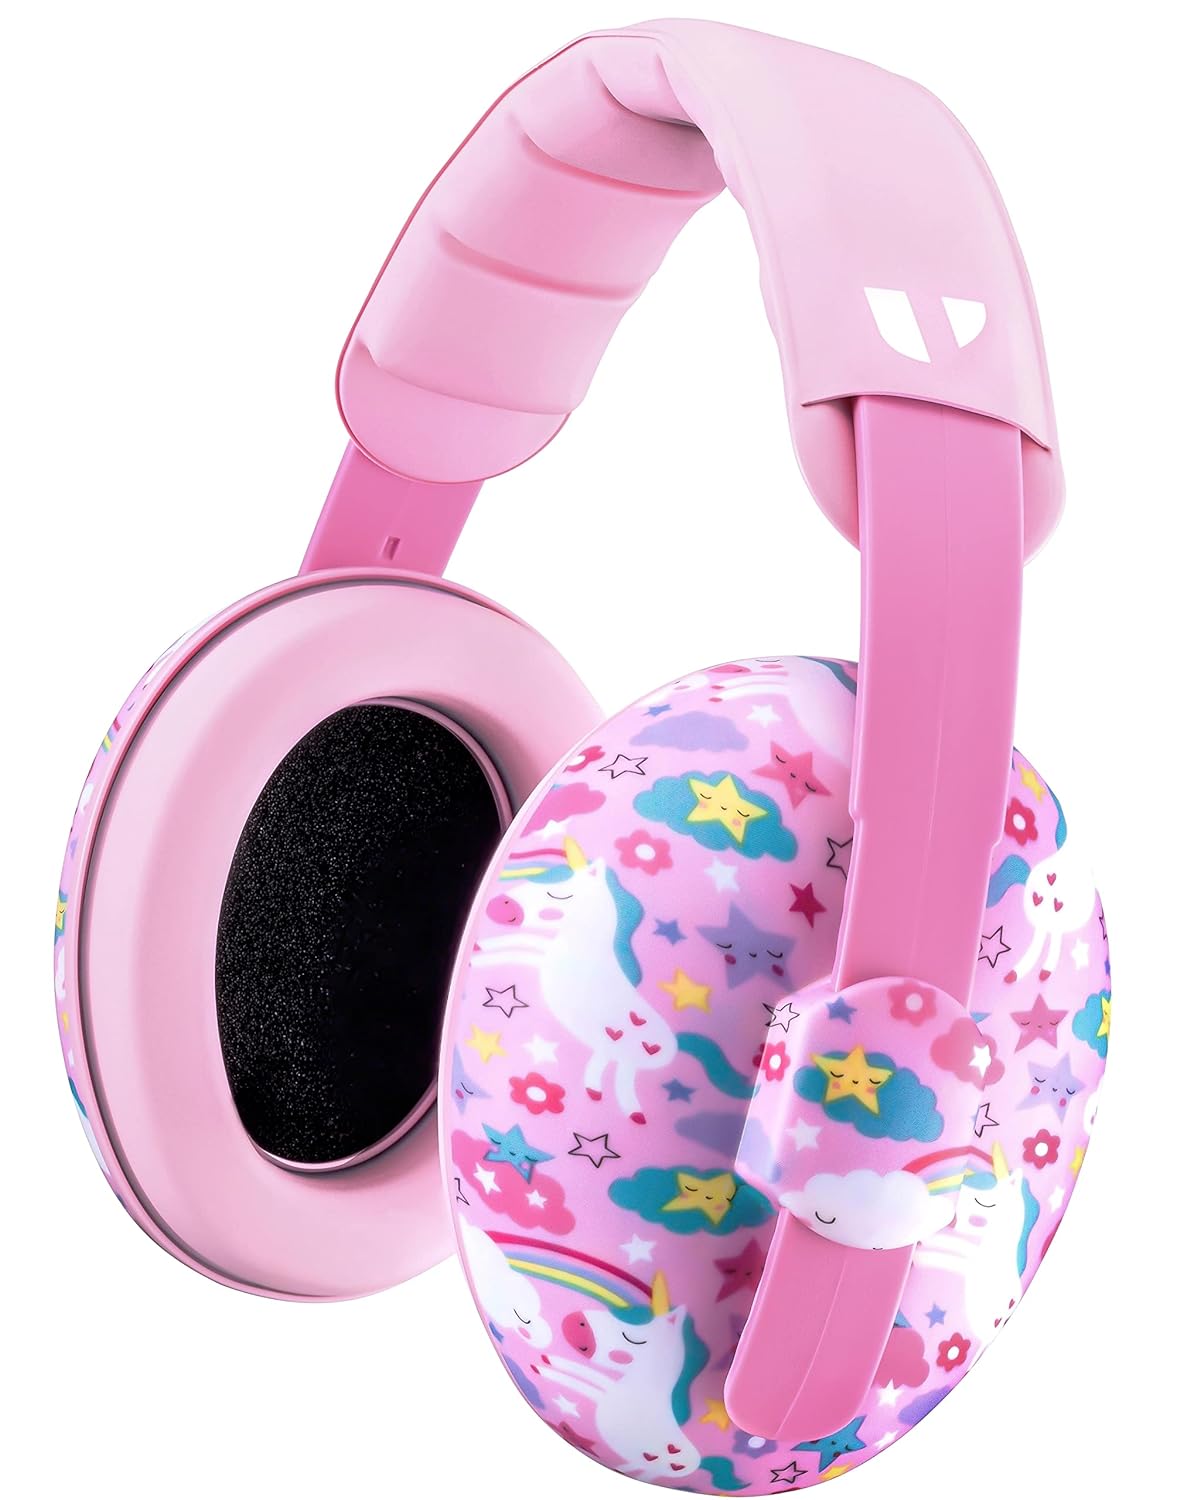 Vanderfields Baby Ear Protection – Noise Reduction Earmuffs for Babies, Toddlers and Infants of 3-48 Months - Unicorn Dream